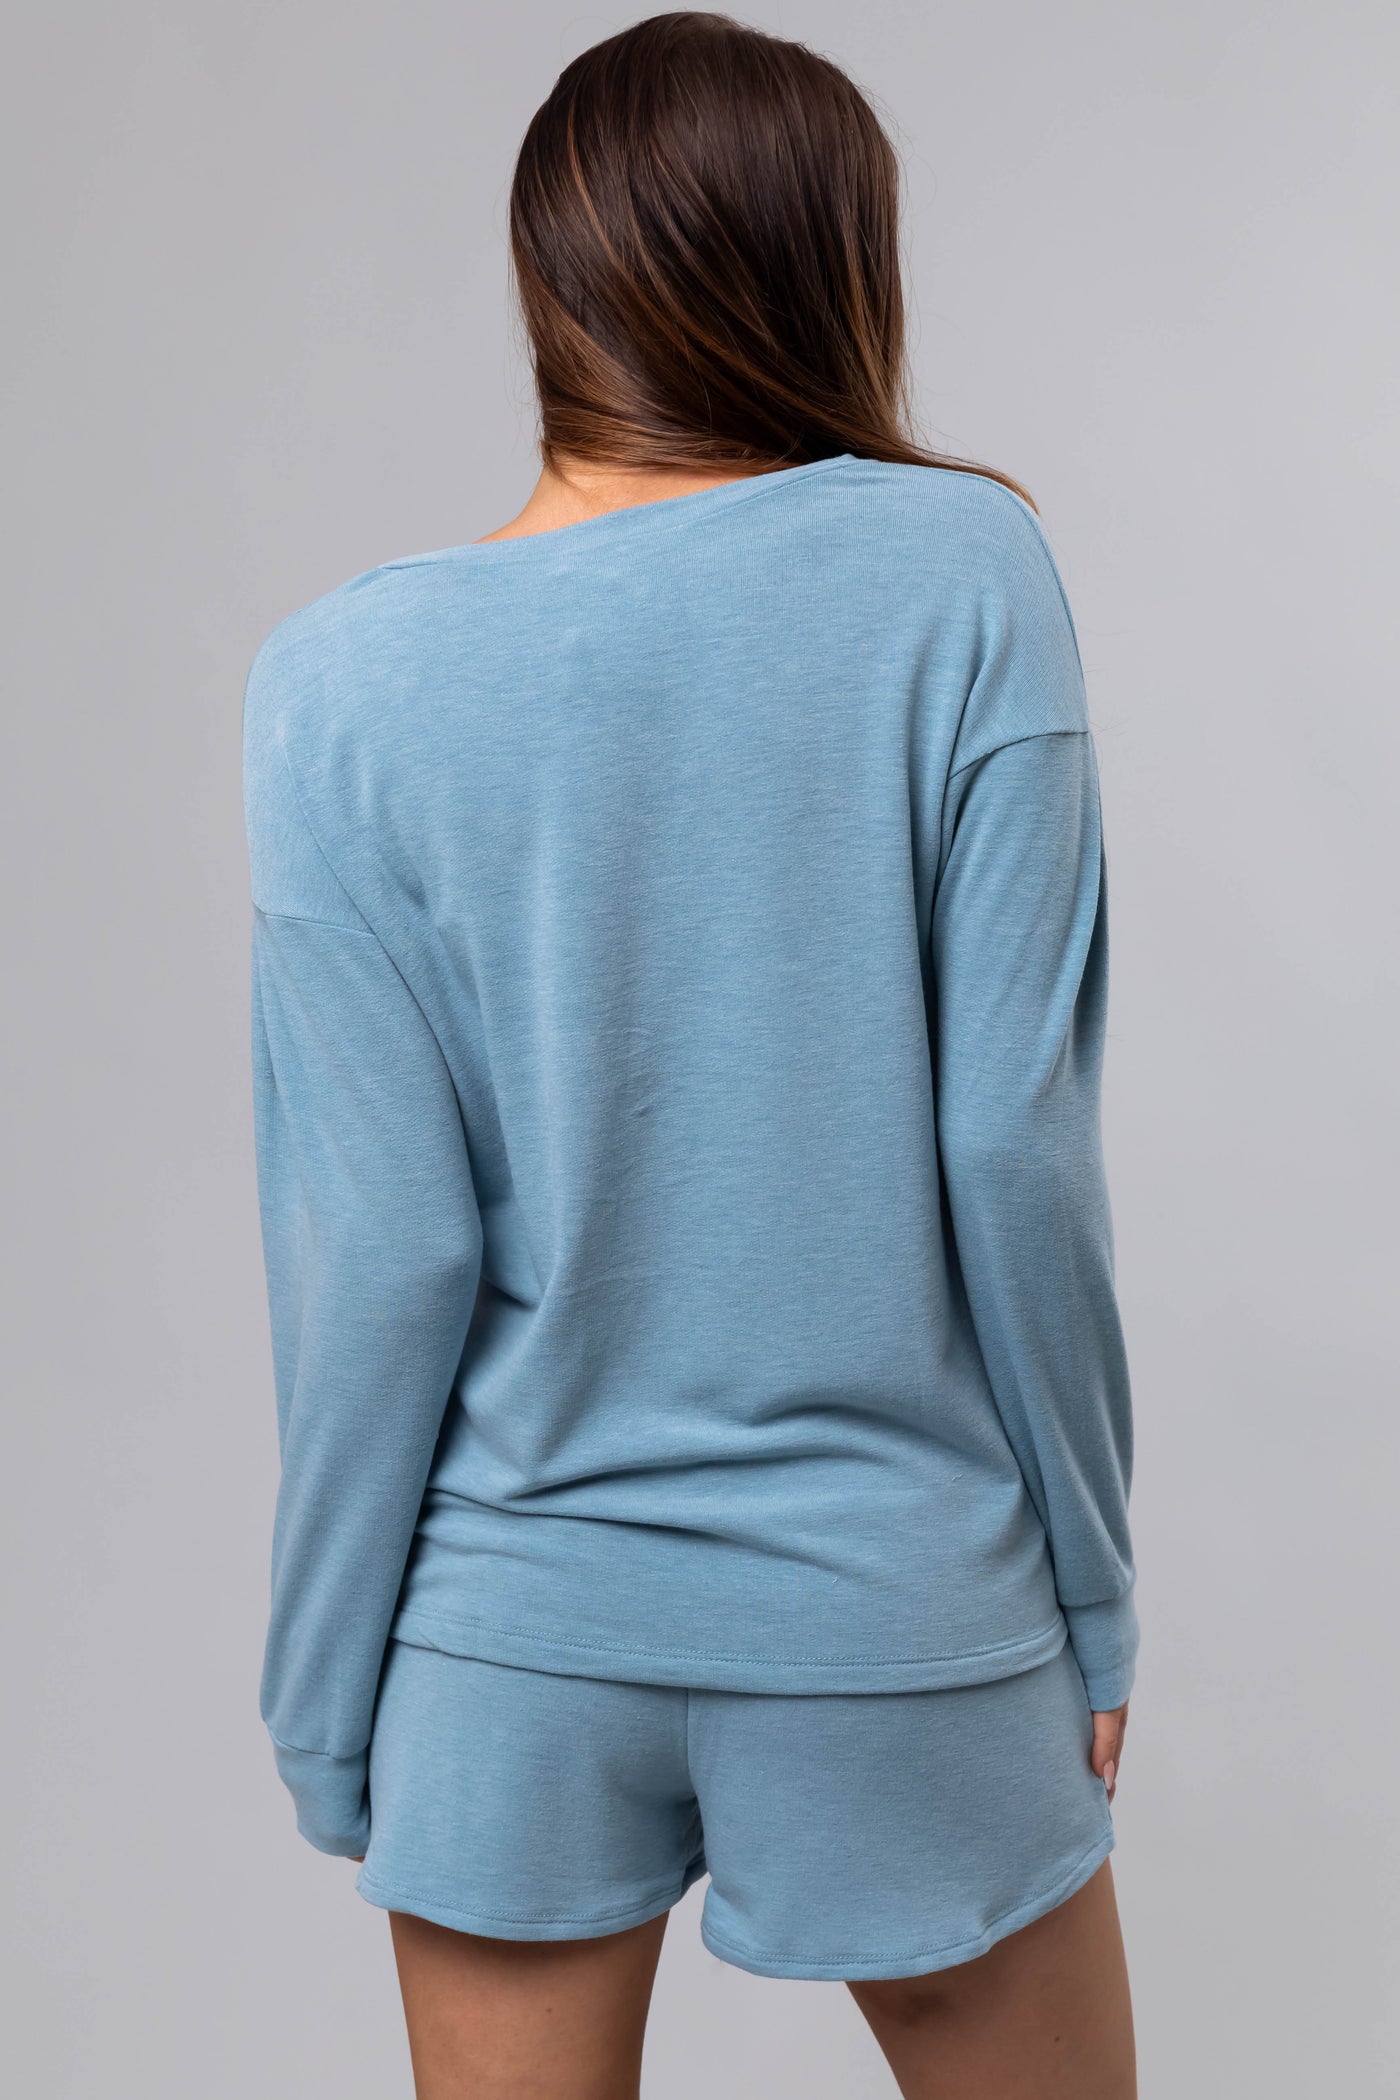 Heathered Blue Long Sleeve Soft Knit Top